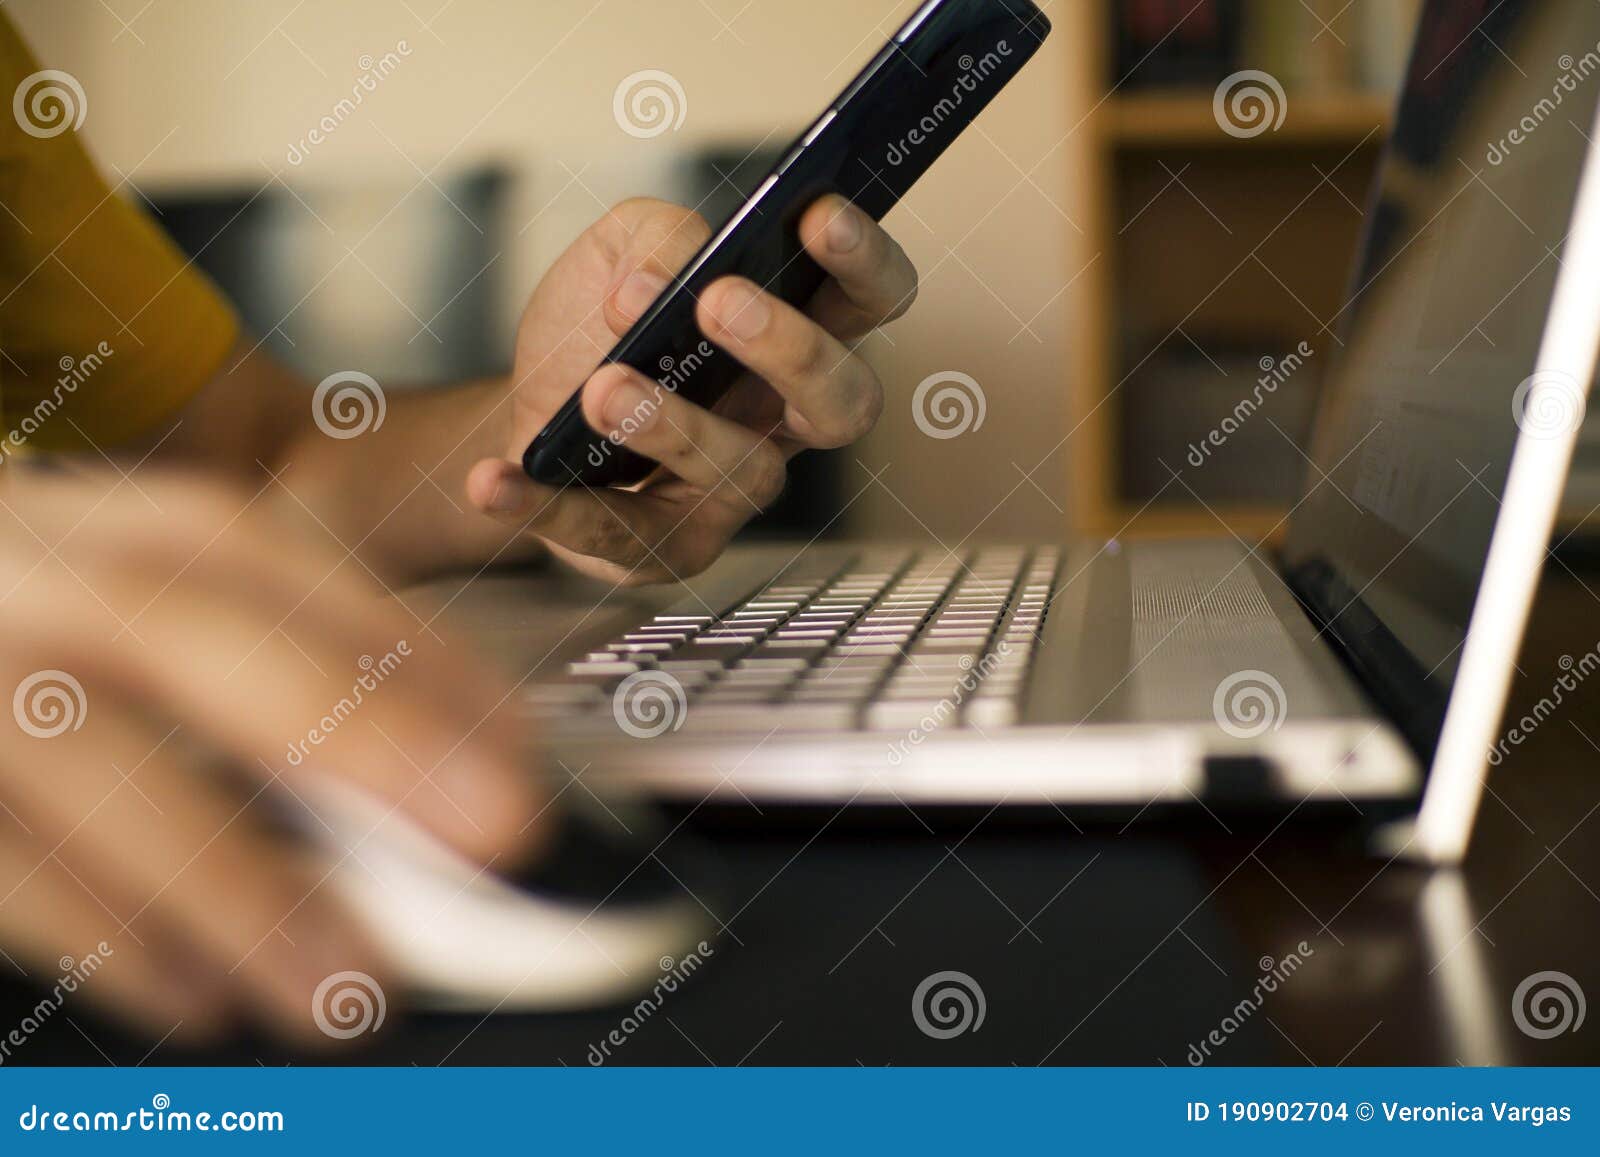 man`s hands teleworking from home